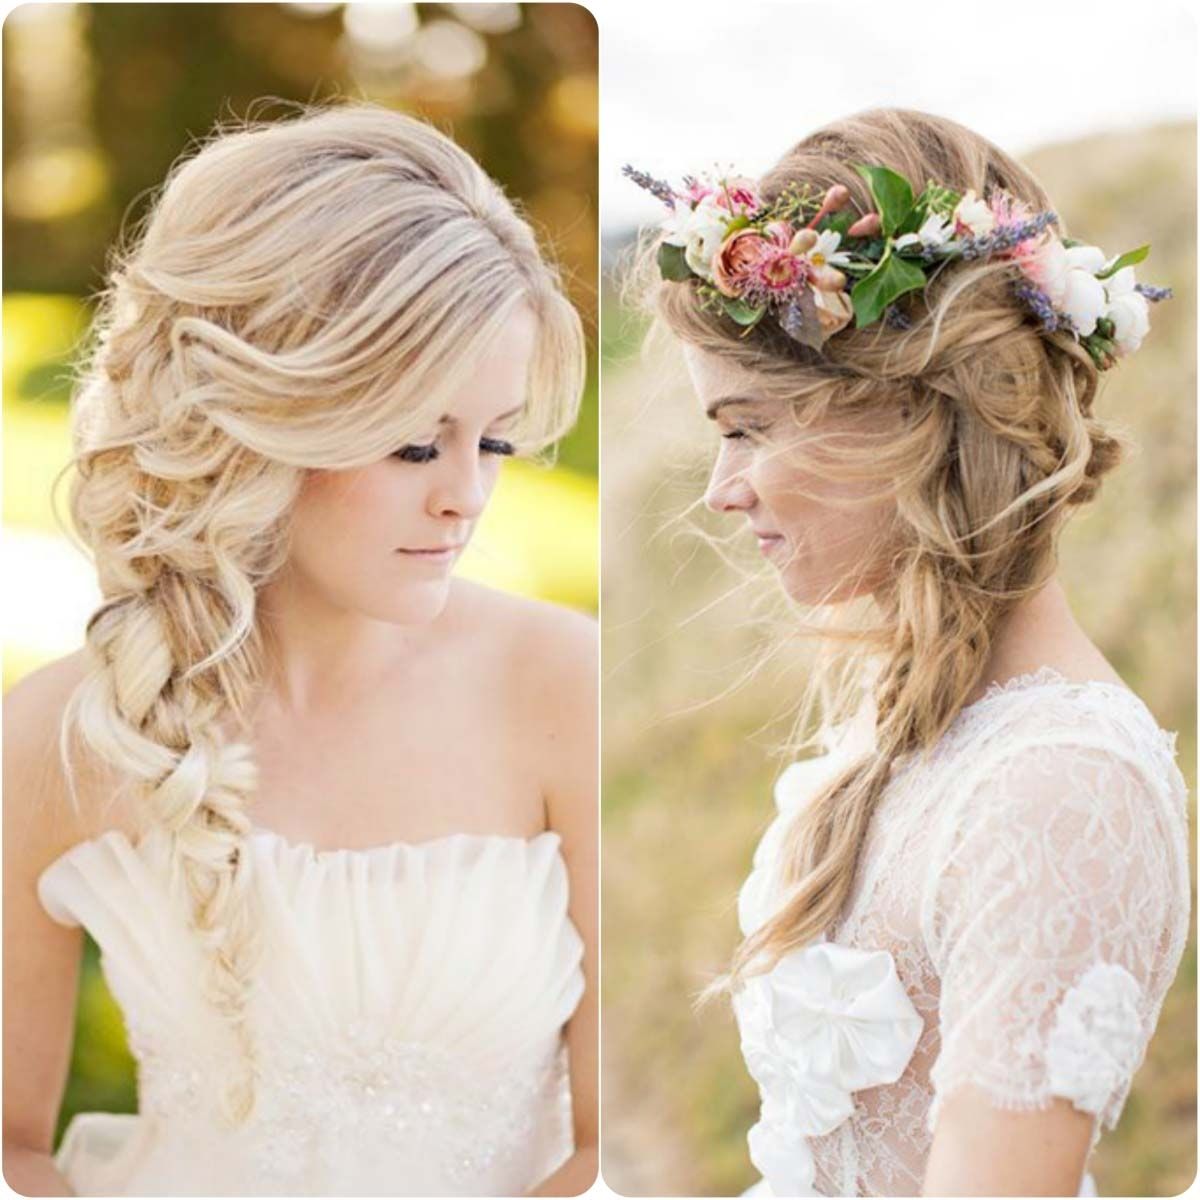 Favorite Fishtail Braid Wedding Hairstyles For Sideraid Hairstyles For Weddings Hairstyle Indian Wedding Fishtail (View 10 of 15)